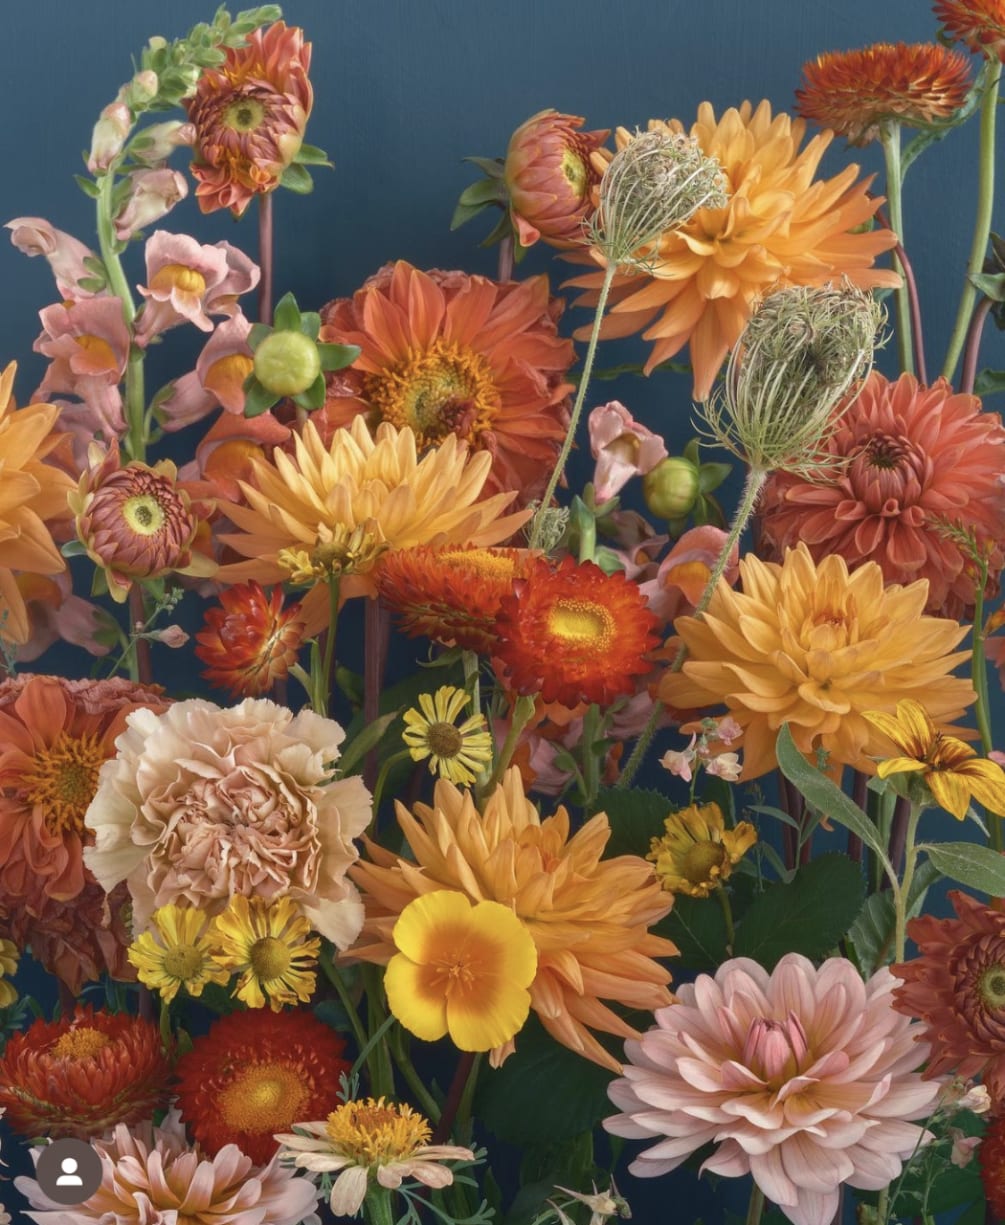 Our designer will pull together a gorgeous seasonal bouquet with the freshest